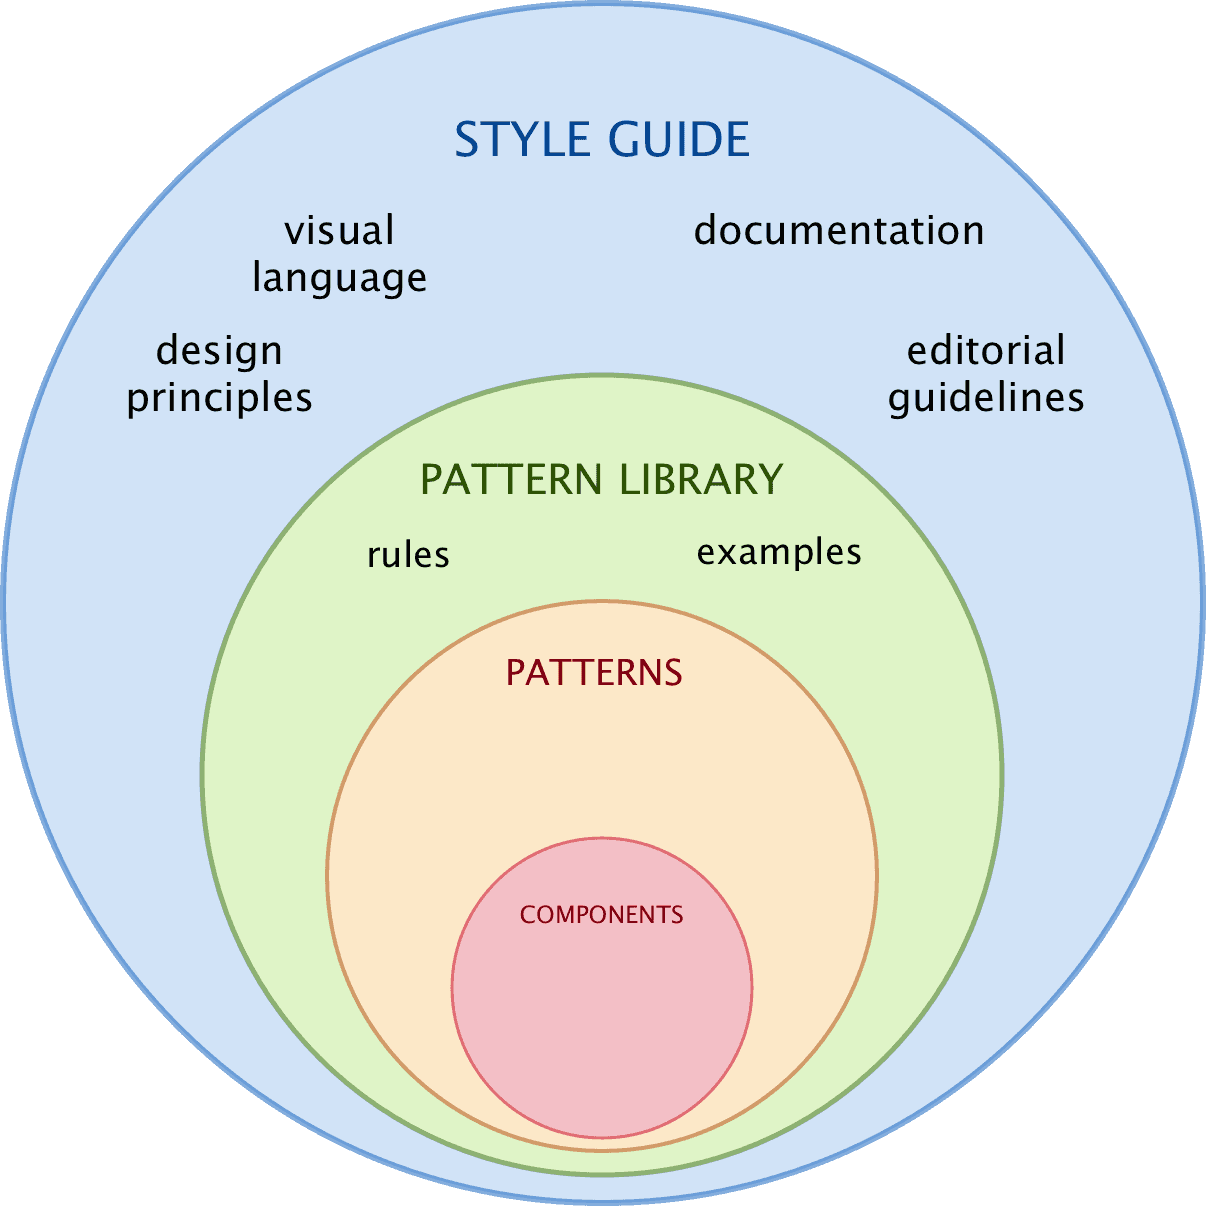 Figure 10. Style guide